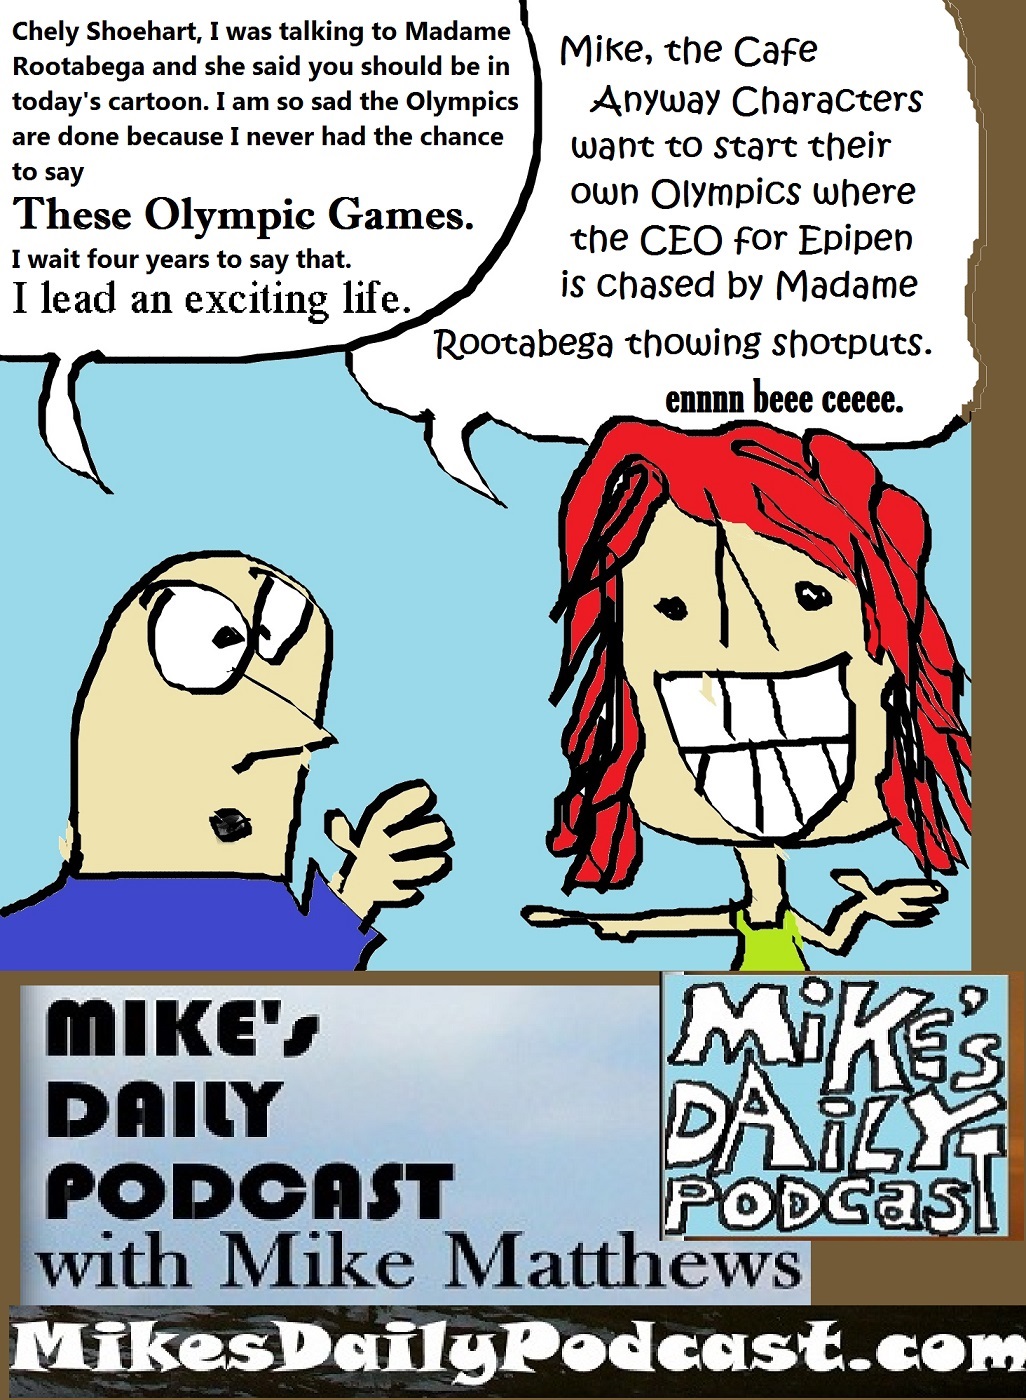 MIKEs DAILY PODCAST 1159 Chely Shoehart Cafe Anyway